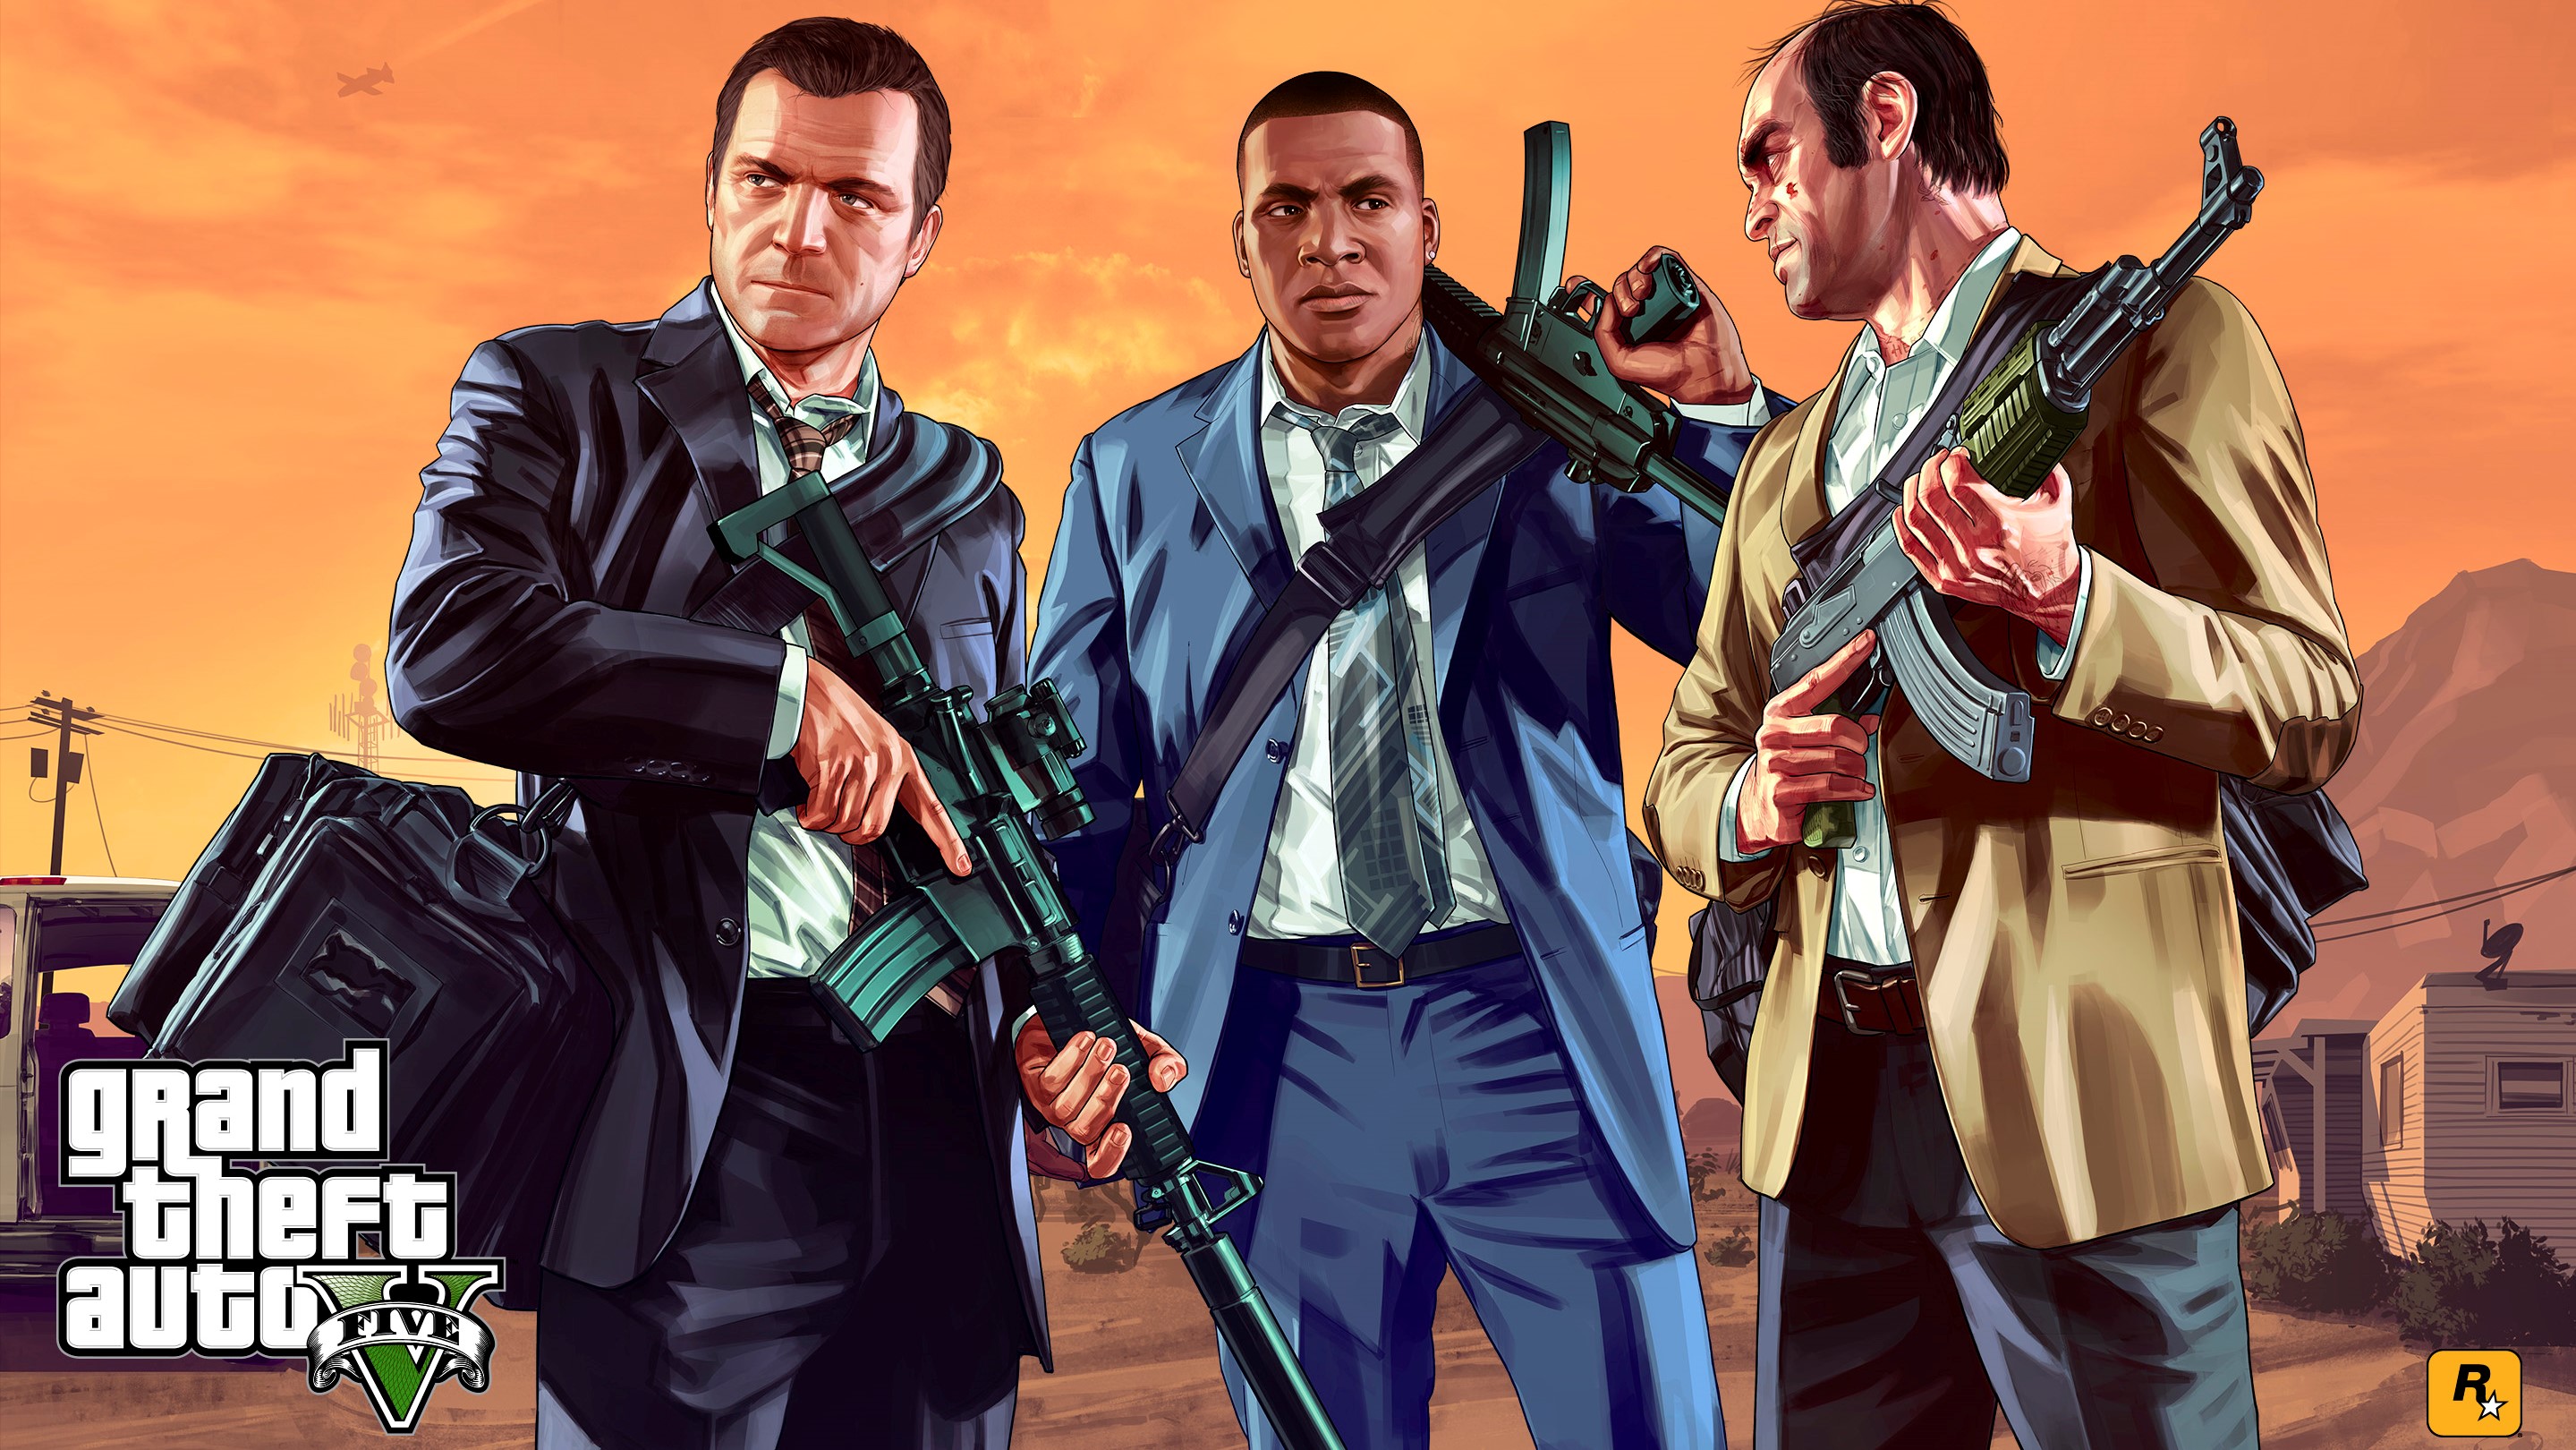 GTA 5 players on PS4 can upgrade to PS5 edition for $10